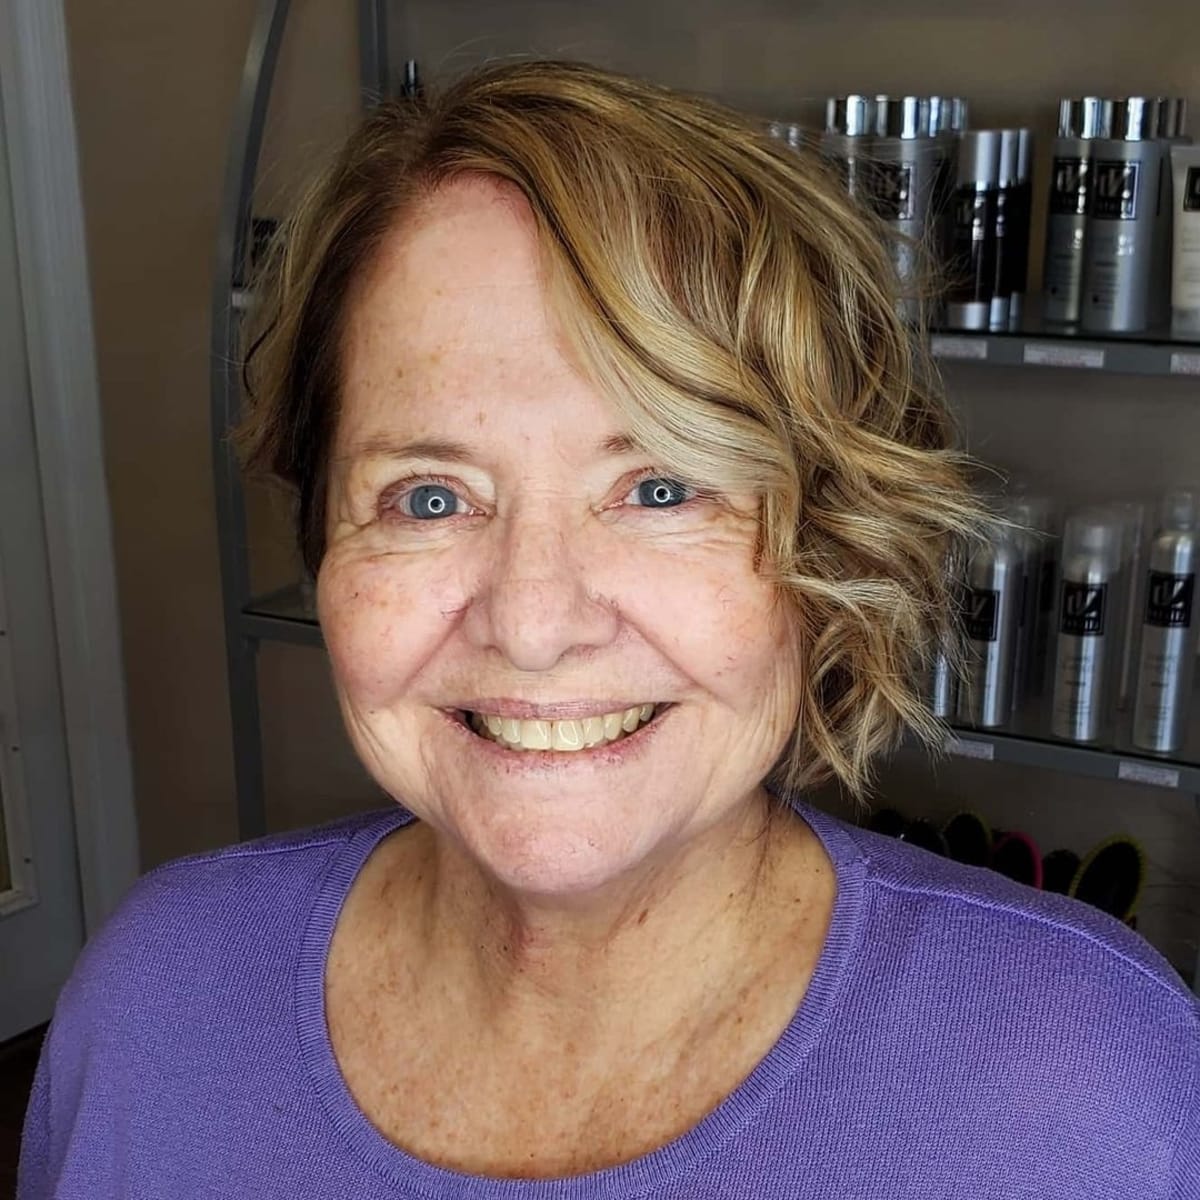 chin length bob with beach waves for women past their 60s